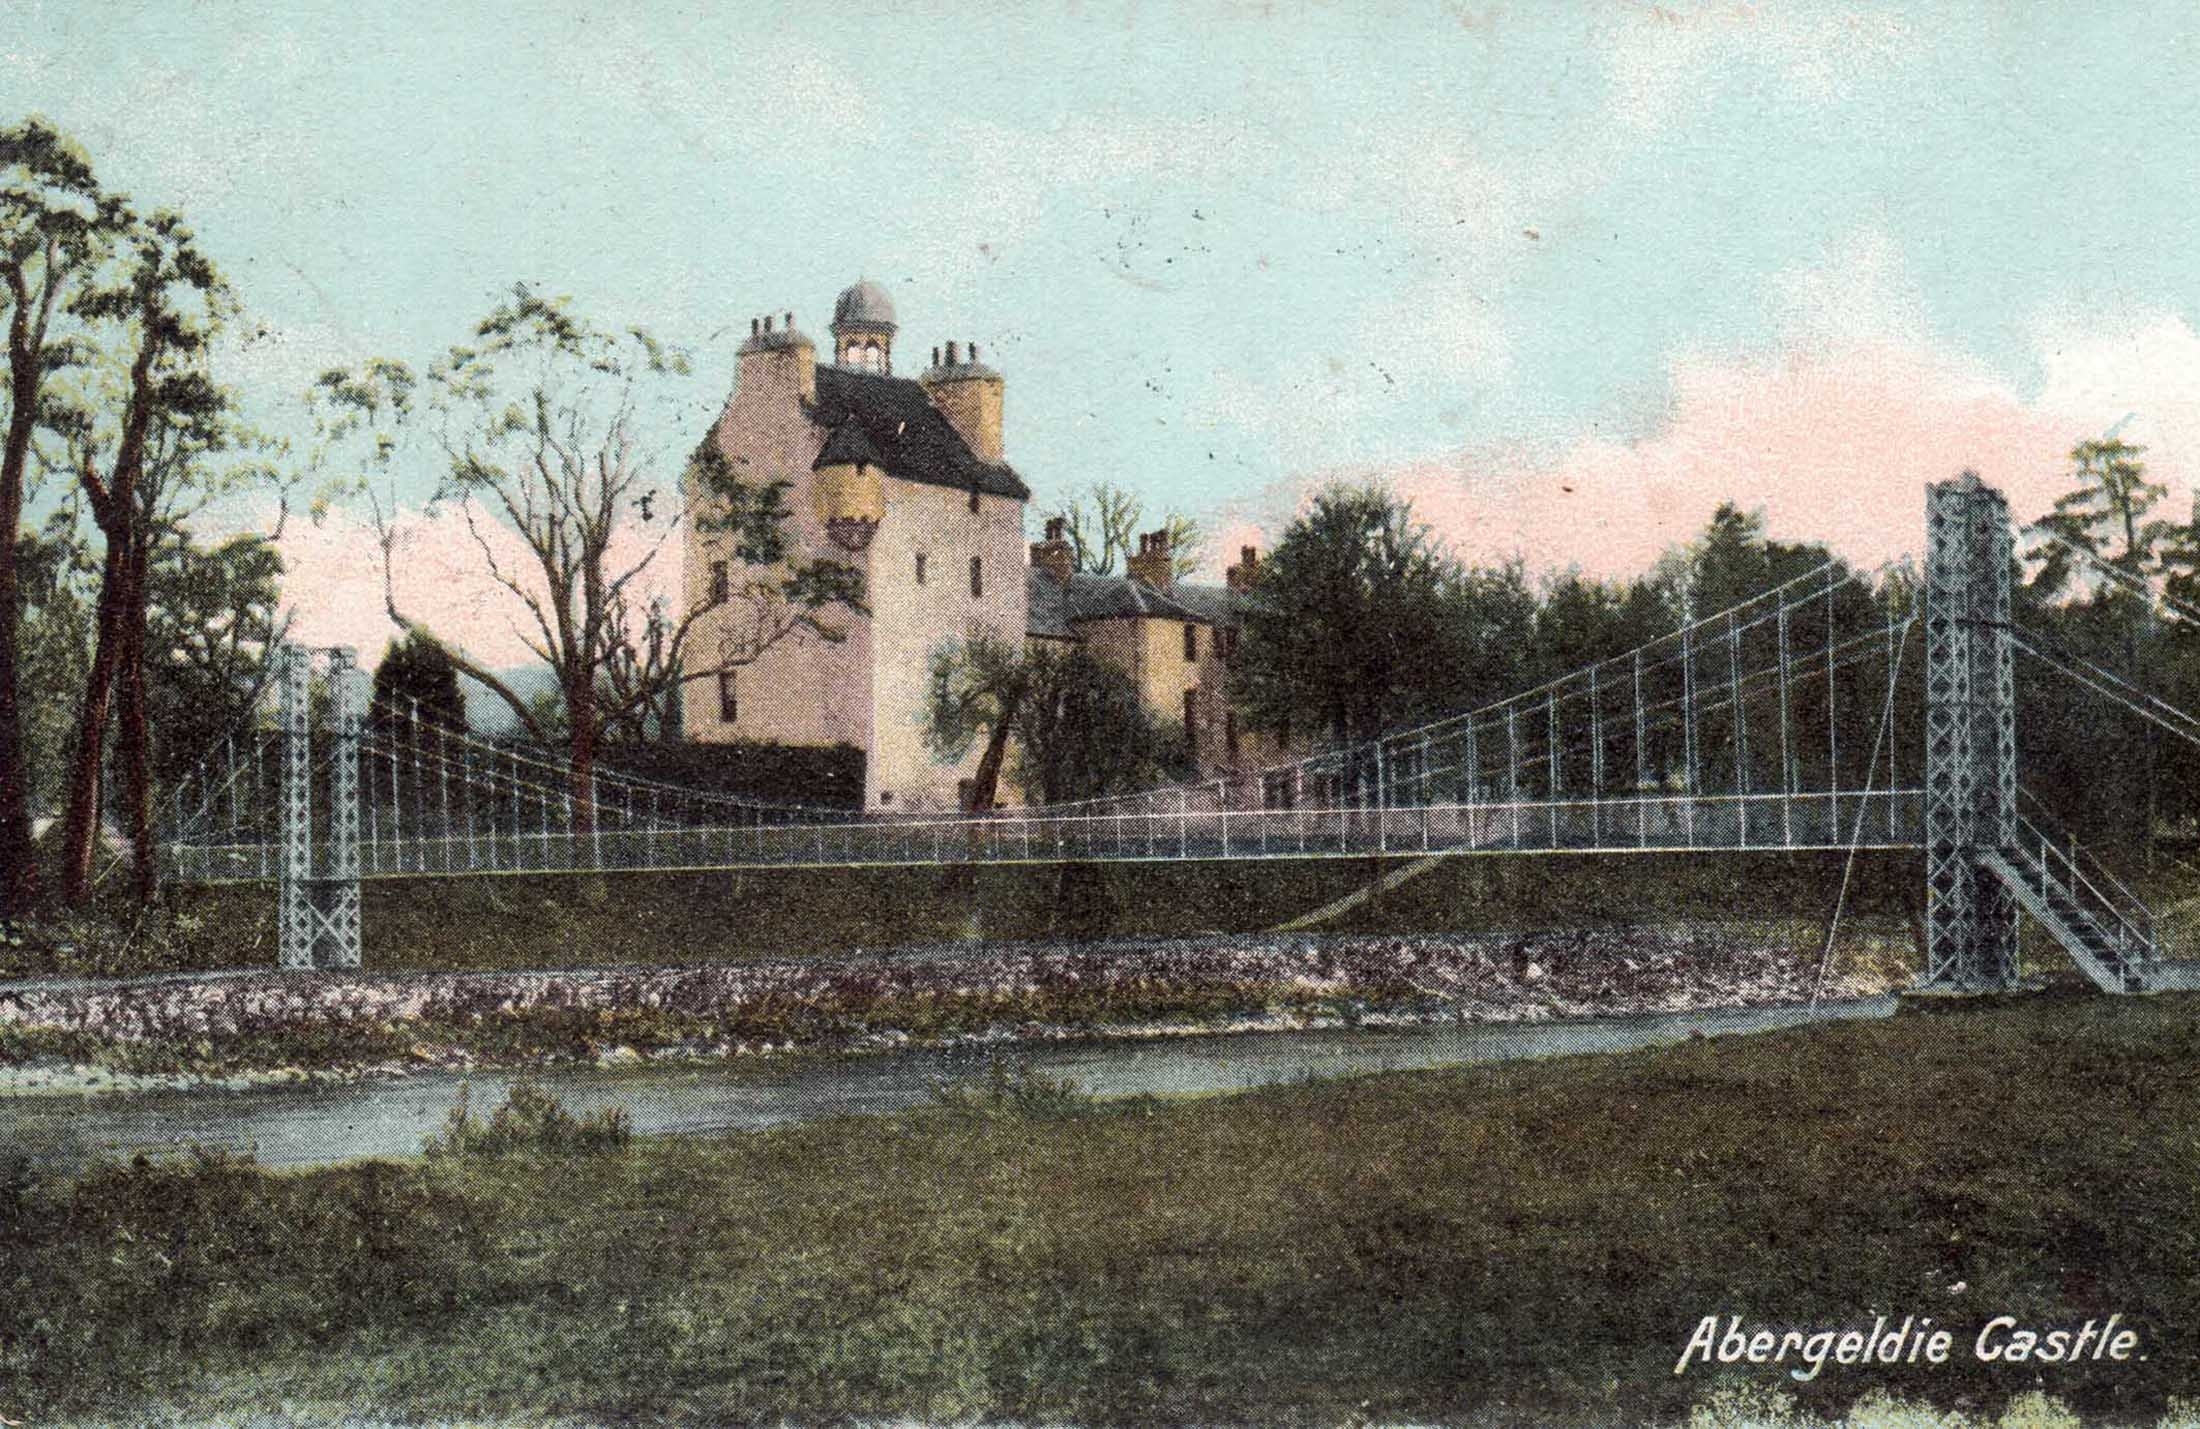 A postcard showing Abergeldie Castle in the early 1900's looking south over the River Dee on Royal Deeside 